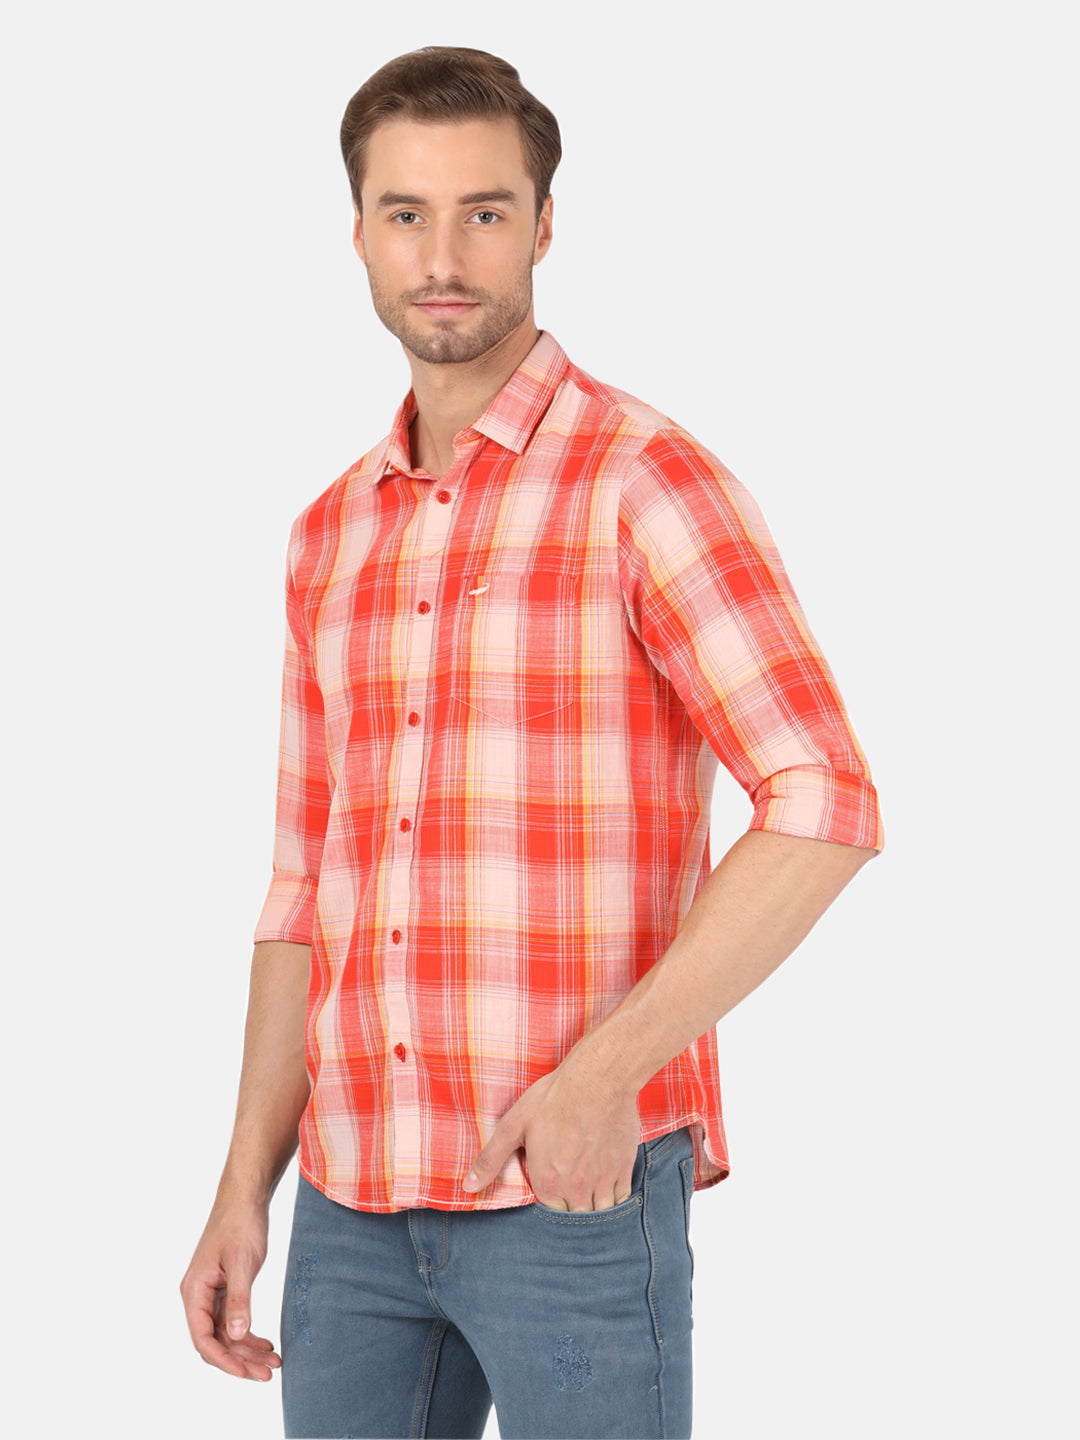 Casual Full Sleeve Comfort Fit Checks Red with Collar Shirt for Men